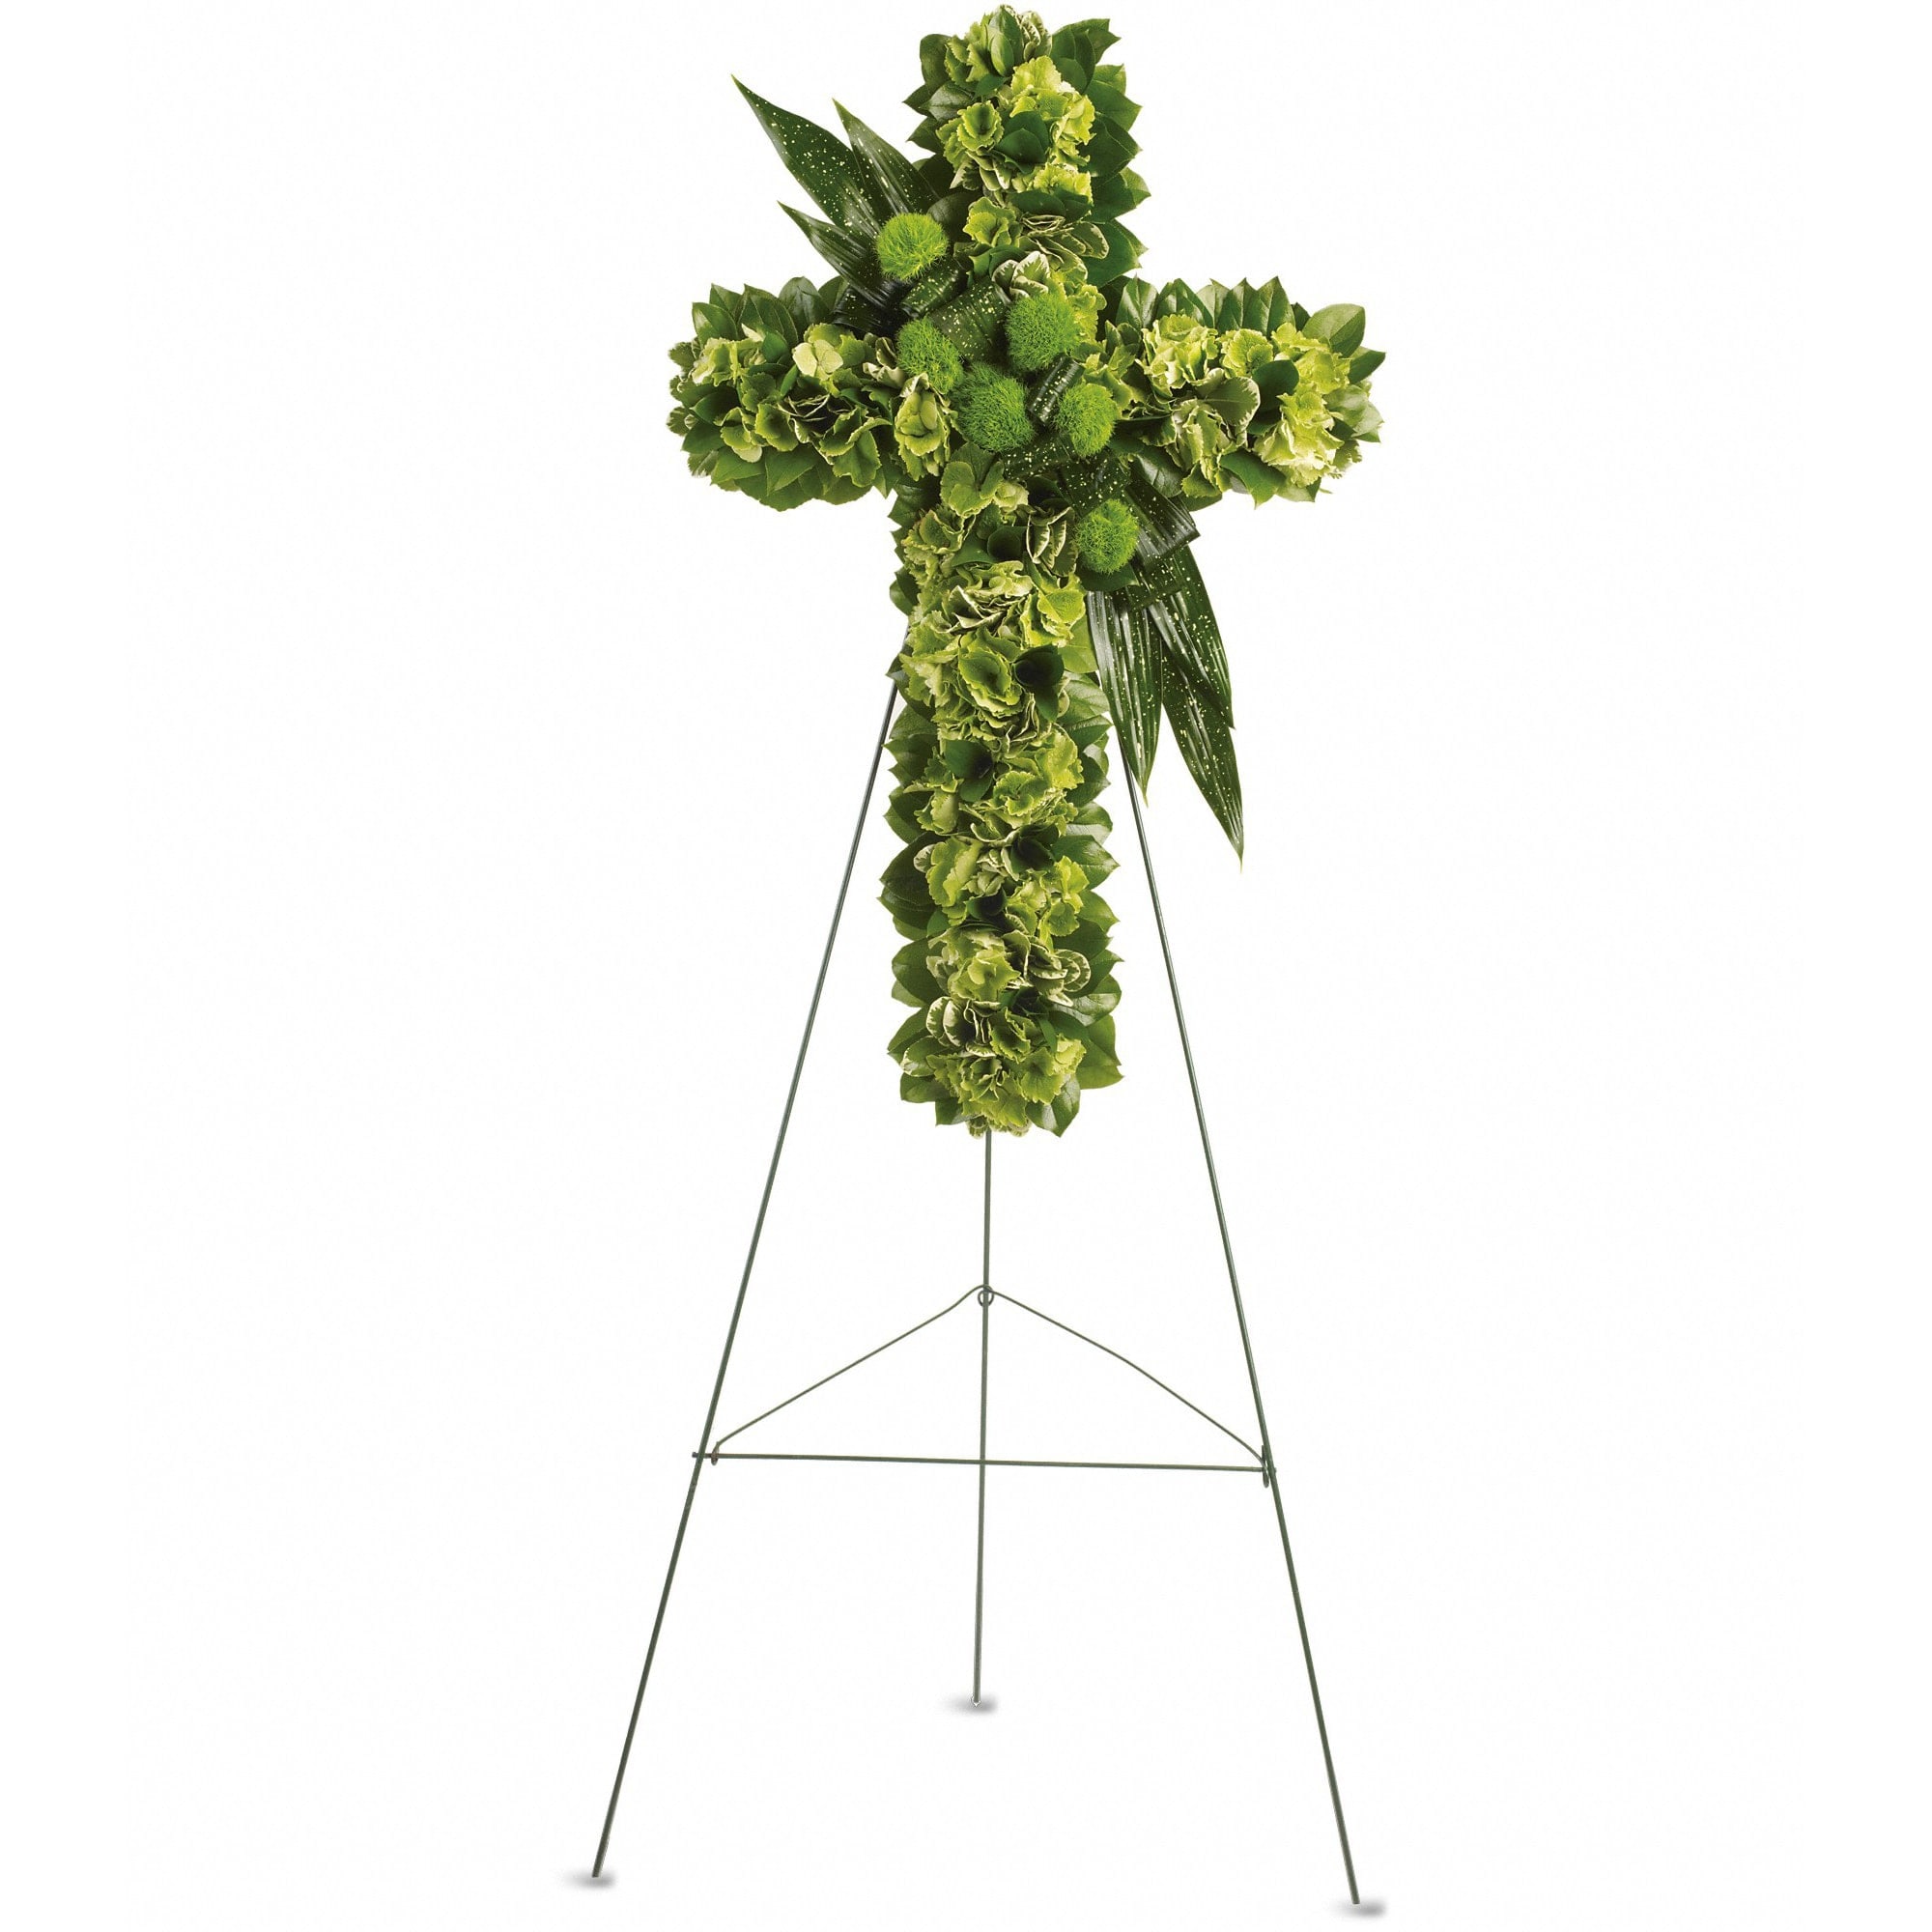 Garden Cross by Teleflora - A spiritual tribute for the religious service, this lovely cross made of green hydrangea, green dianthus and other favorites symbolizes the hope for eternal life.  